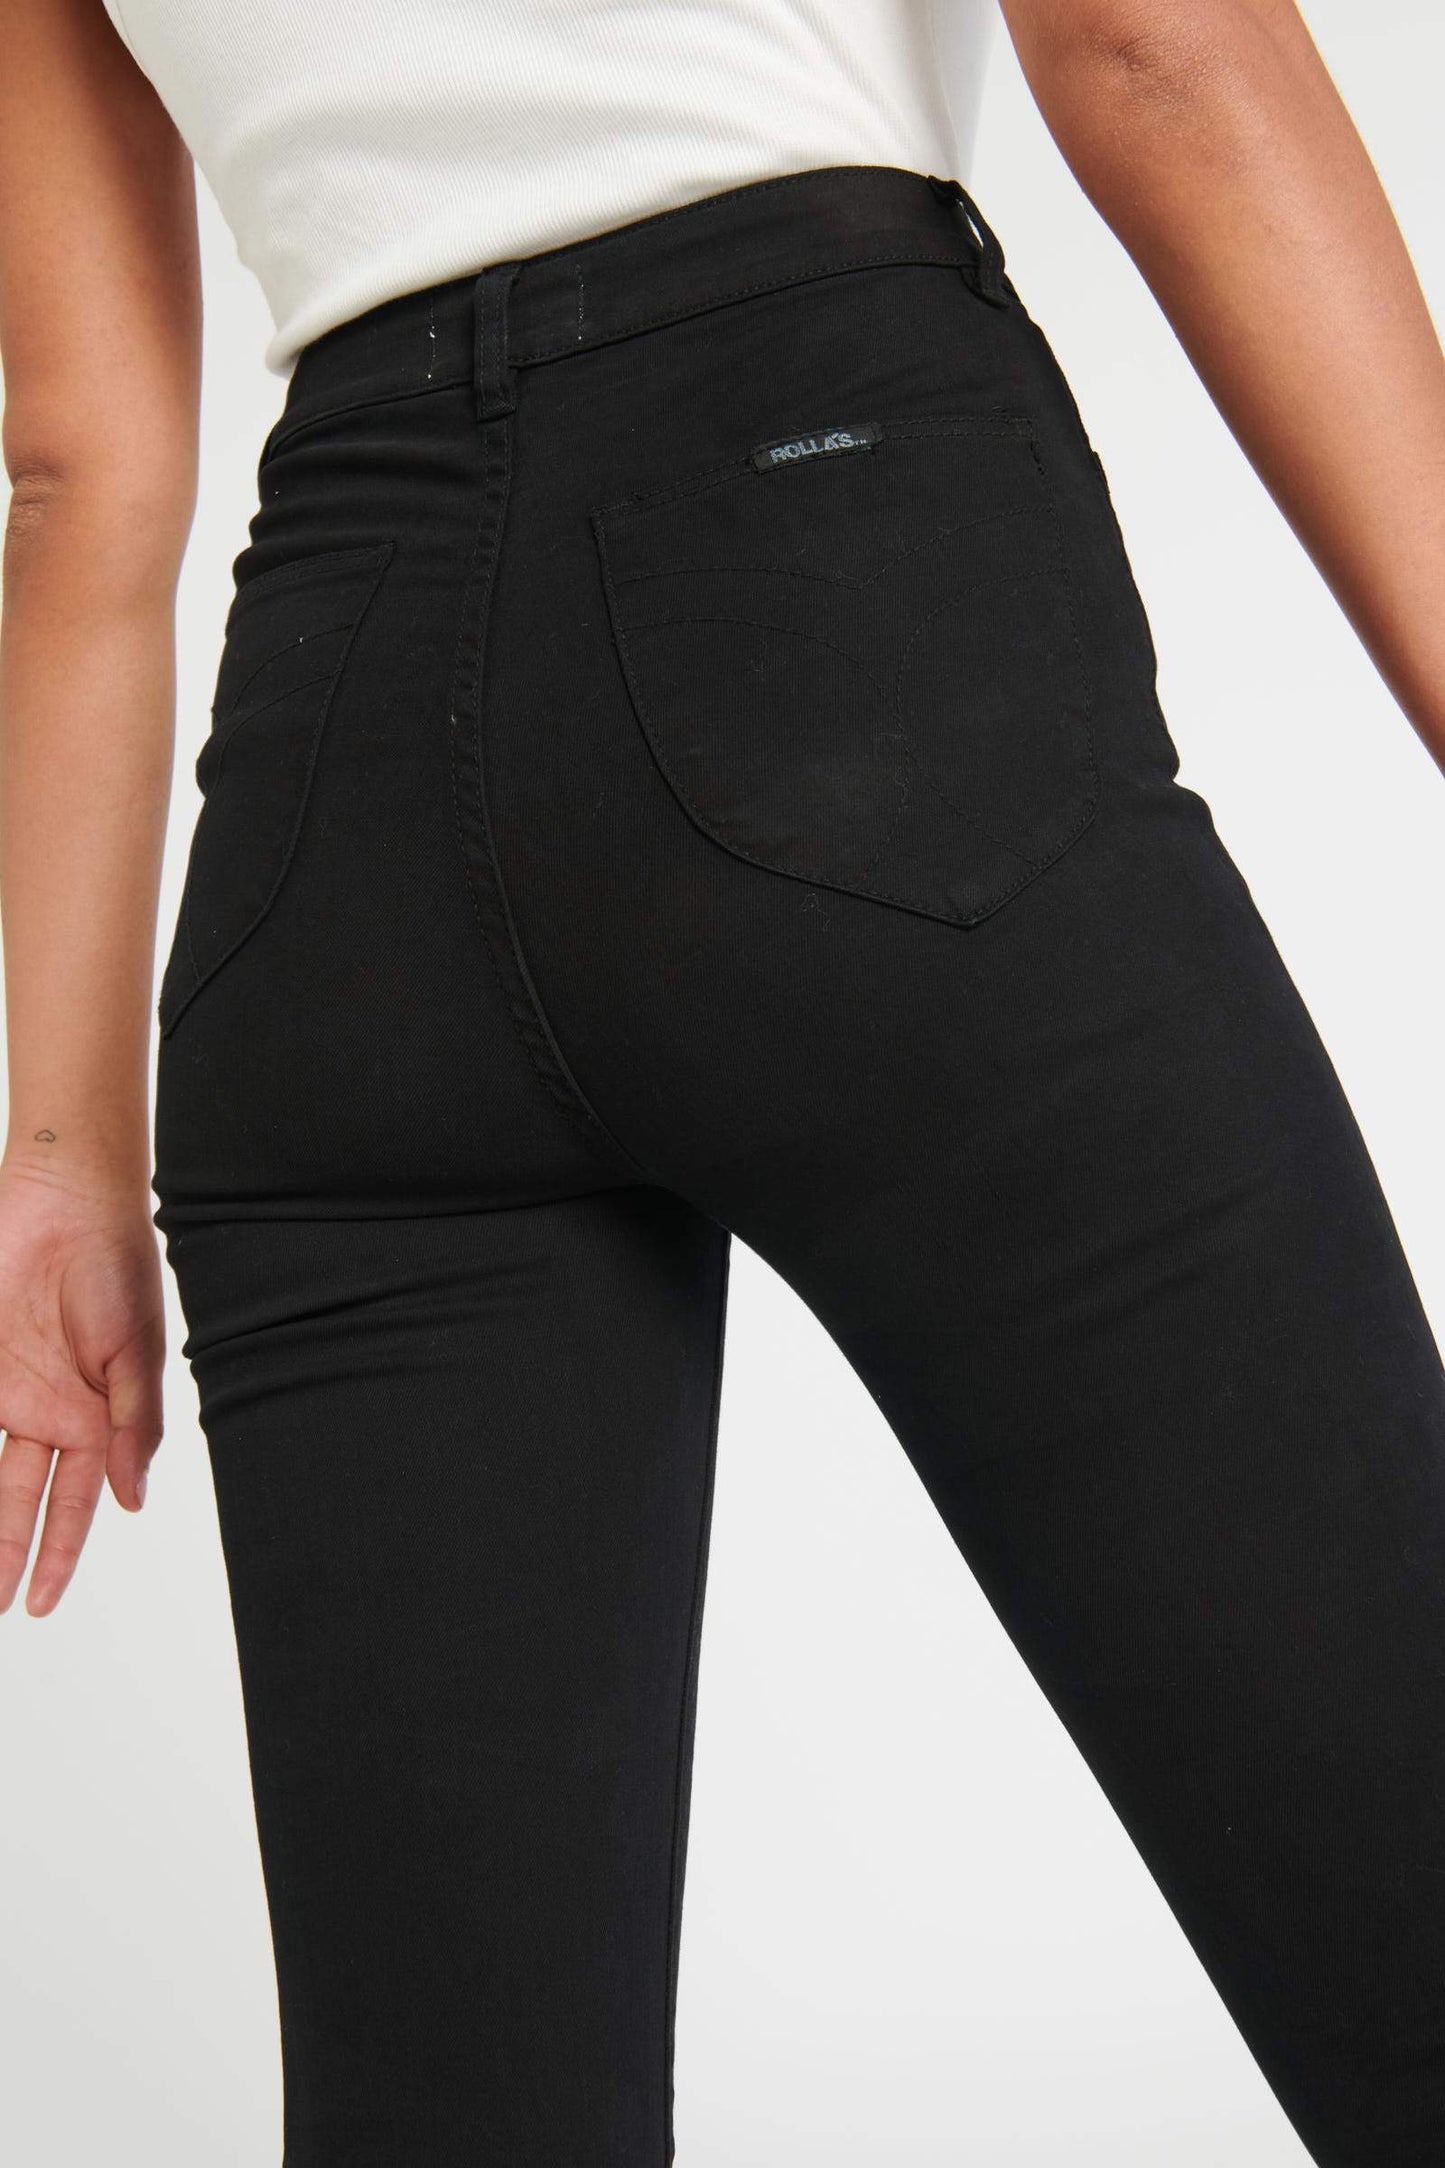 ROLLA'S Eastcoast Ankle Galactic Black Jeans